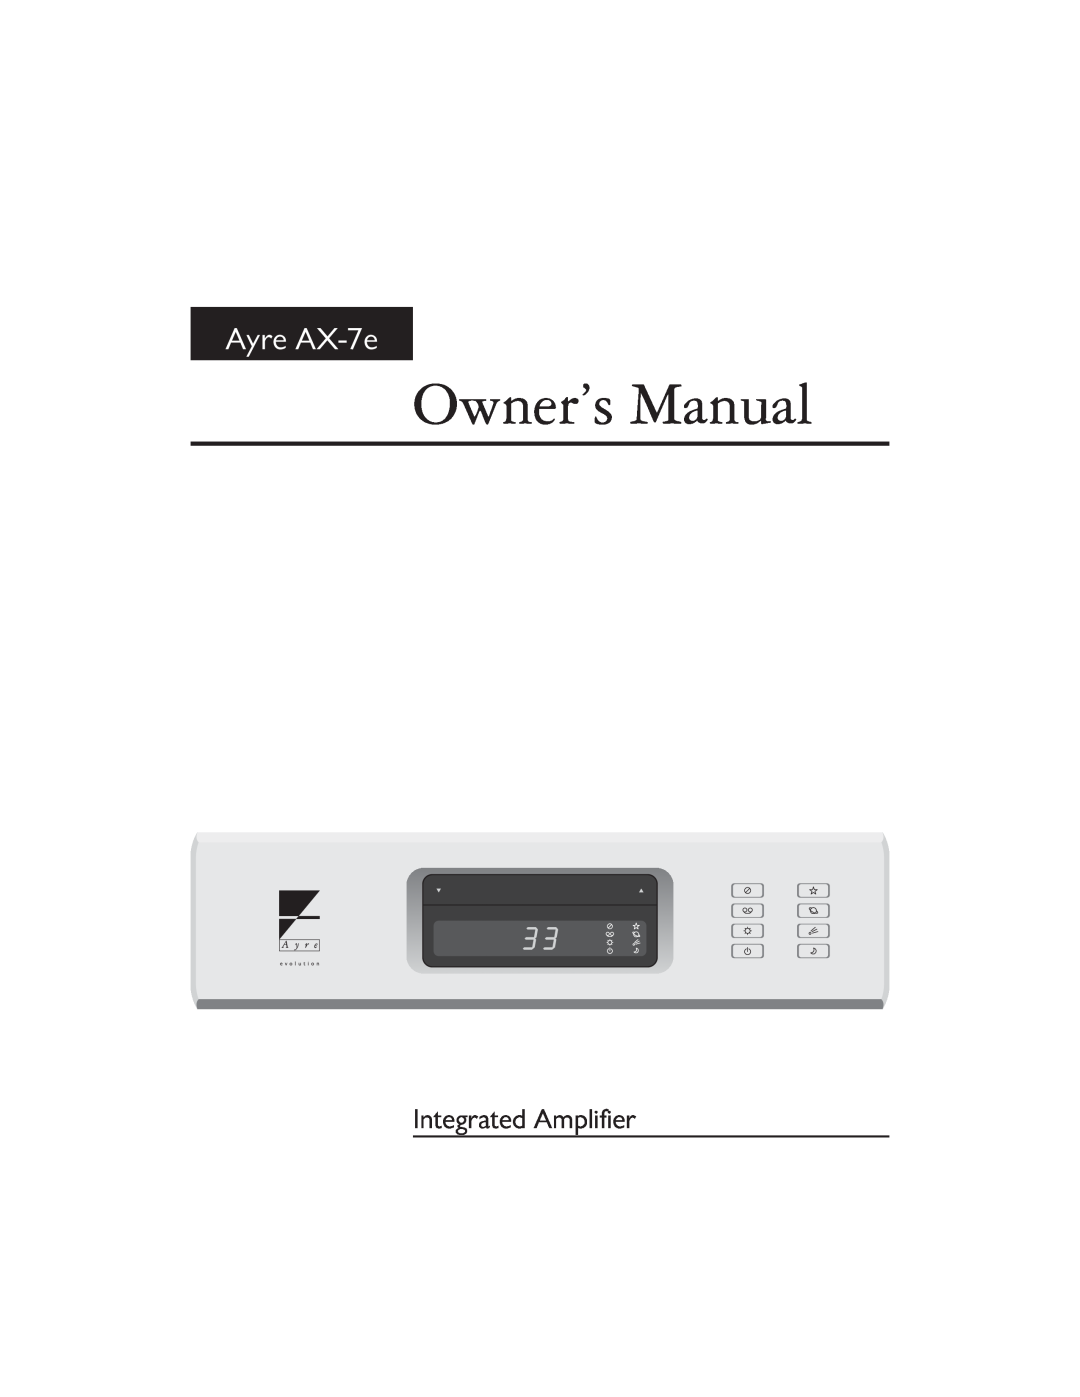 Ayre Acoustics AX-7E owner manual Owner’s Manual, Ayre AX-7e, Integrated Amplifier 